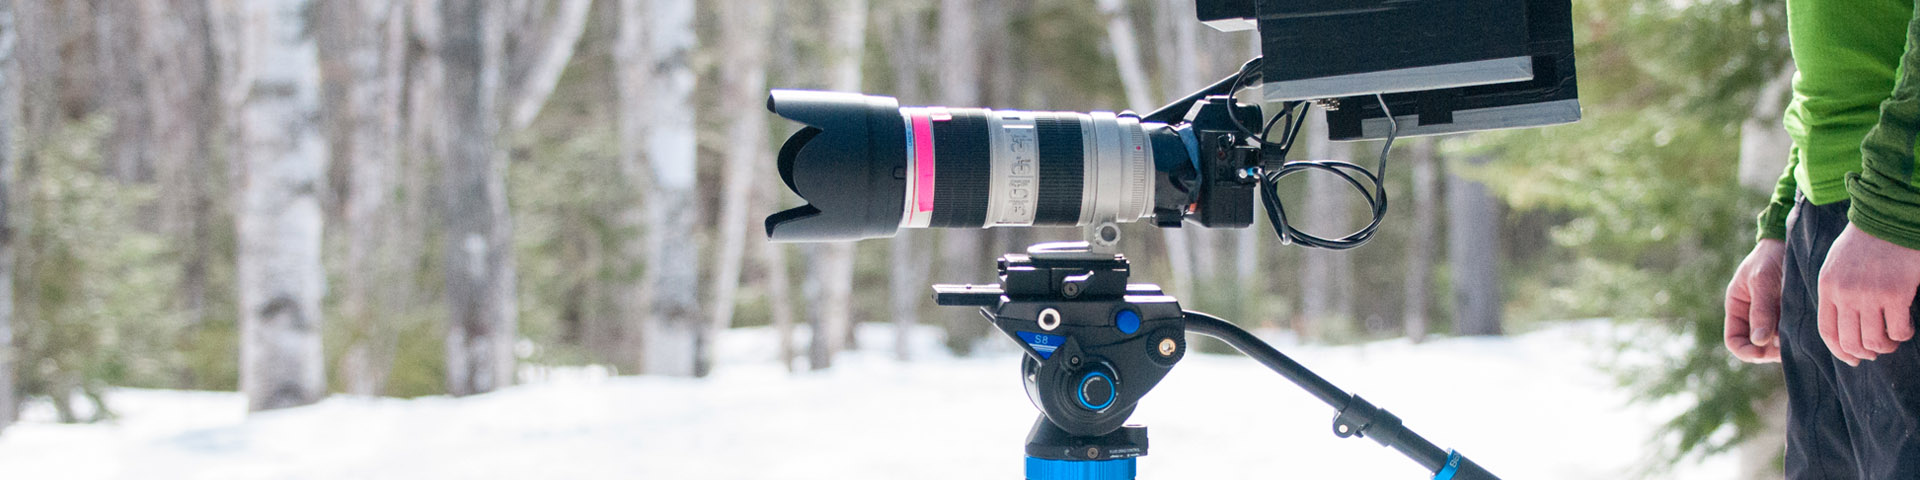 Professional photo and video equipment in the forest during winter.